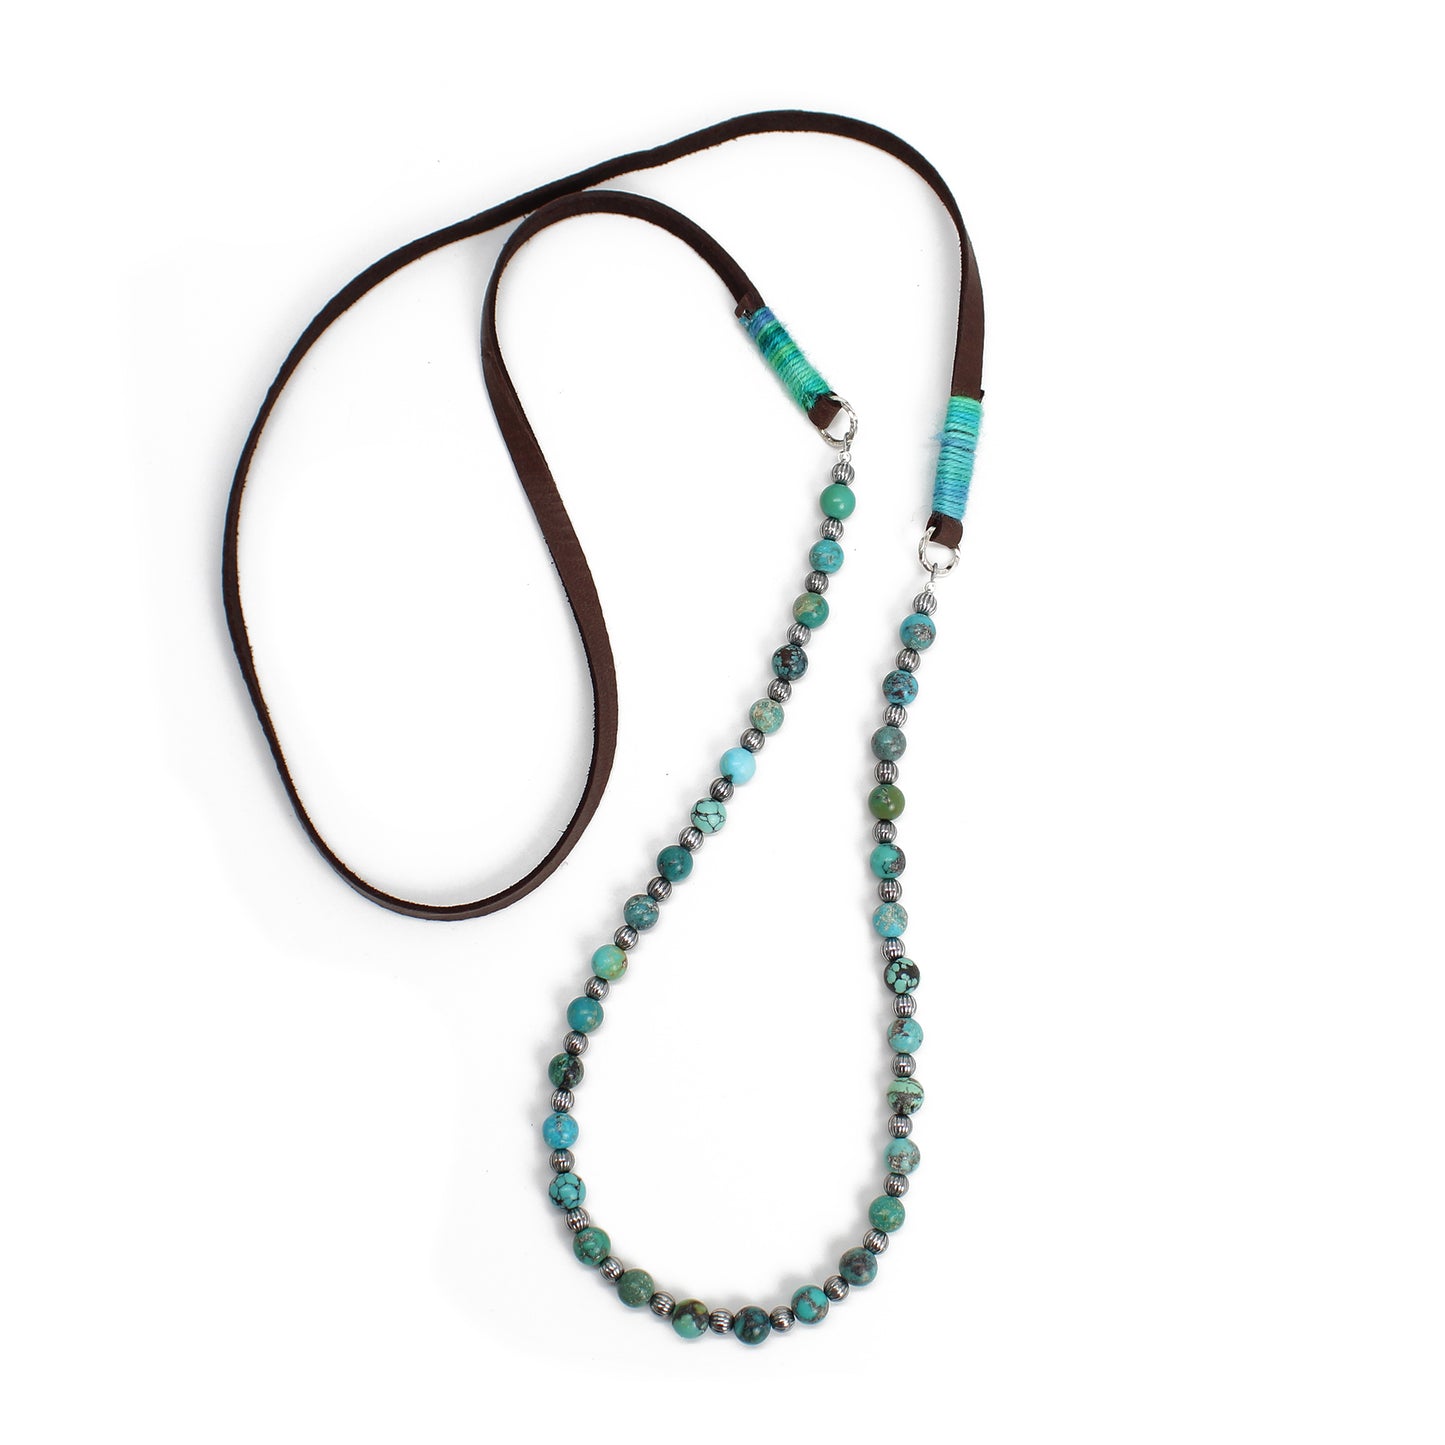 Hubei Turquoise and Leather Necklace